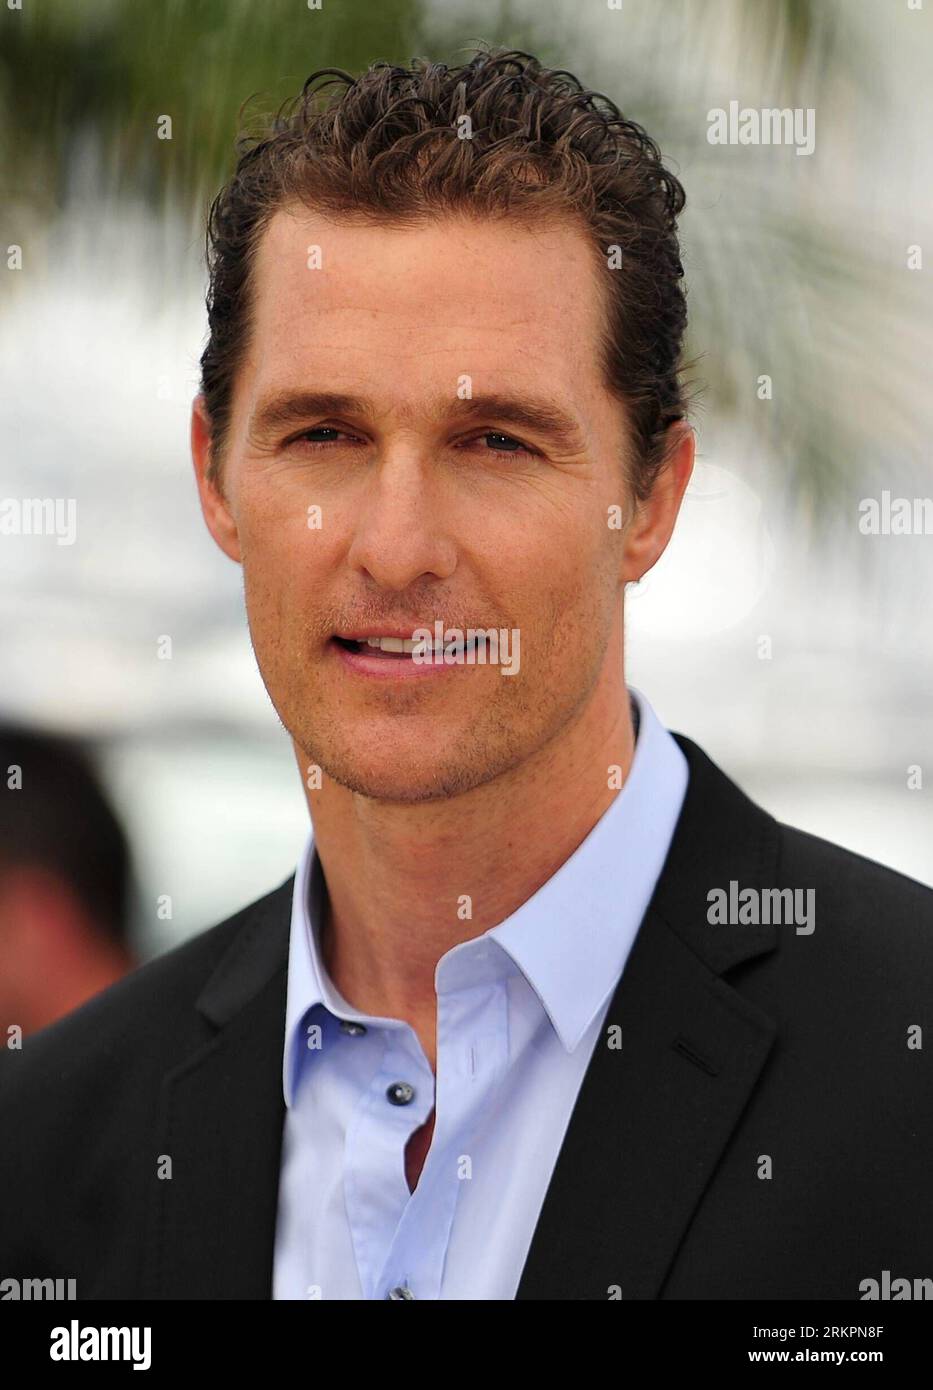 Bildnummer: 58030785  Datum: 24.05.2012  Copyright: imago/Xinhua (120524) -- CANNES, May 24, 2012 (Xinhua) -- Actor Matthew Mcconaughey poses during a photocall for the film The Paperboy directed by Lee Daniels, at the 65th Cannes Film Festival, in Cannes, southern France, May 24, 2012. (Xinhua/Ye Pingfan)(srb) FRANCE-CANNES-FILM FESTIVAL-PHOTOCALL-THE PAPERBOY PUBLICATIONxNOTxINxCHN Kultur Entertainment People Film 65. Internationale Filmfestspiele Cannes Porträt x0x xkg 2012 hoch      58030785 Date 24 05 2012 Copyright Imago XINHUA  Cannes May 24 2012 XINHUA Actor Matthew McConaughey Poses d Stock Photo